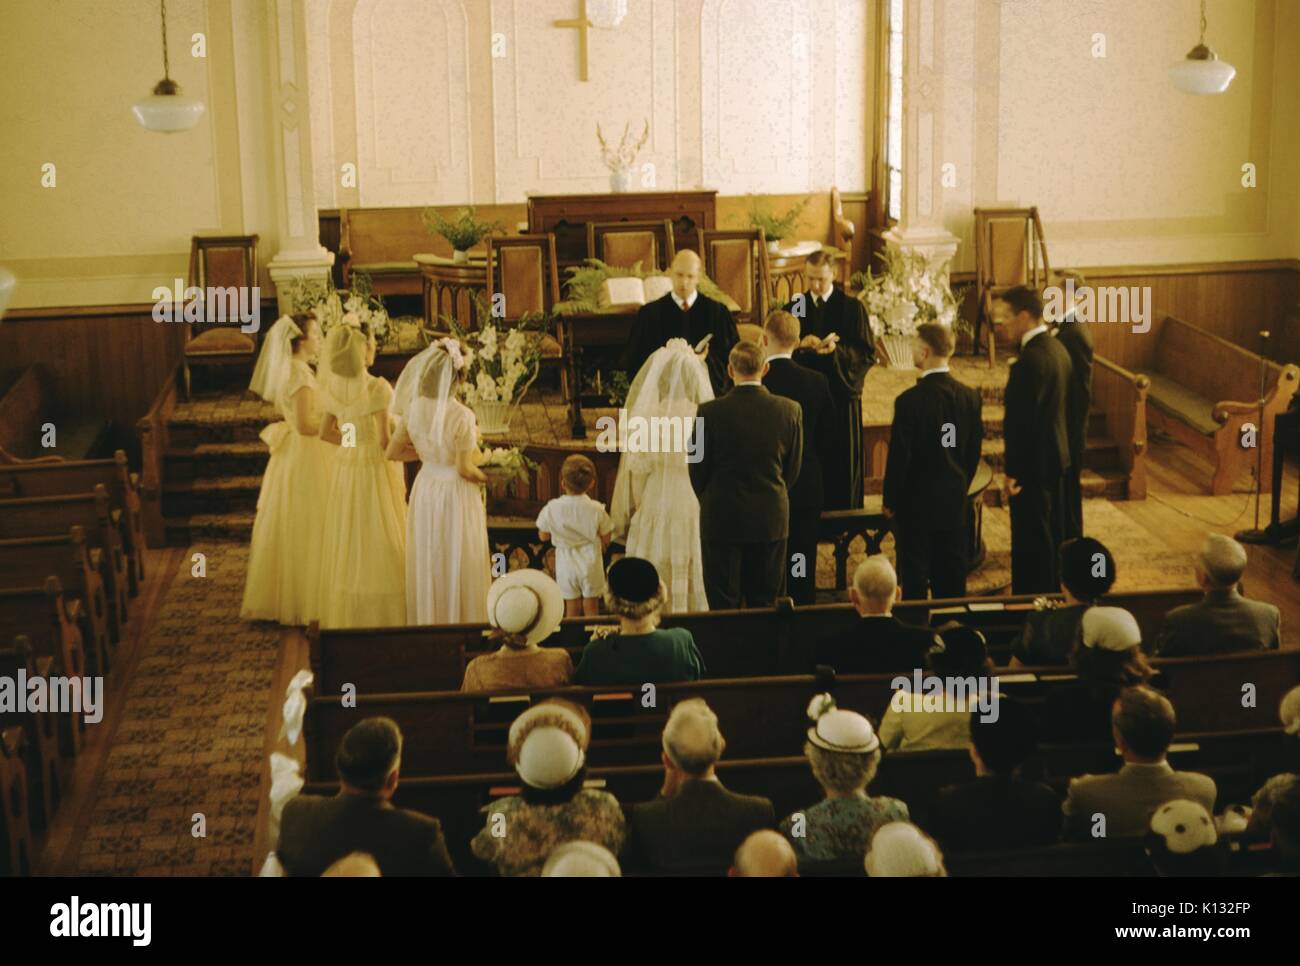 Wedding at a missionary church, bridal party, bridge and groom standing in the front of the church with the pastor, high-angle view, attendees sitting in pews and wearing formal outfits, Japan, 1943. Stock Photo